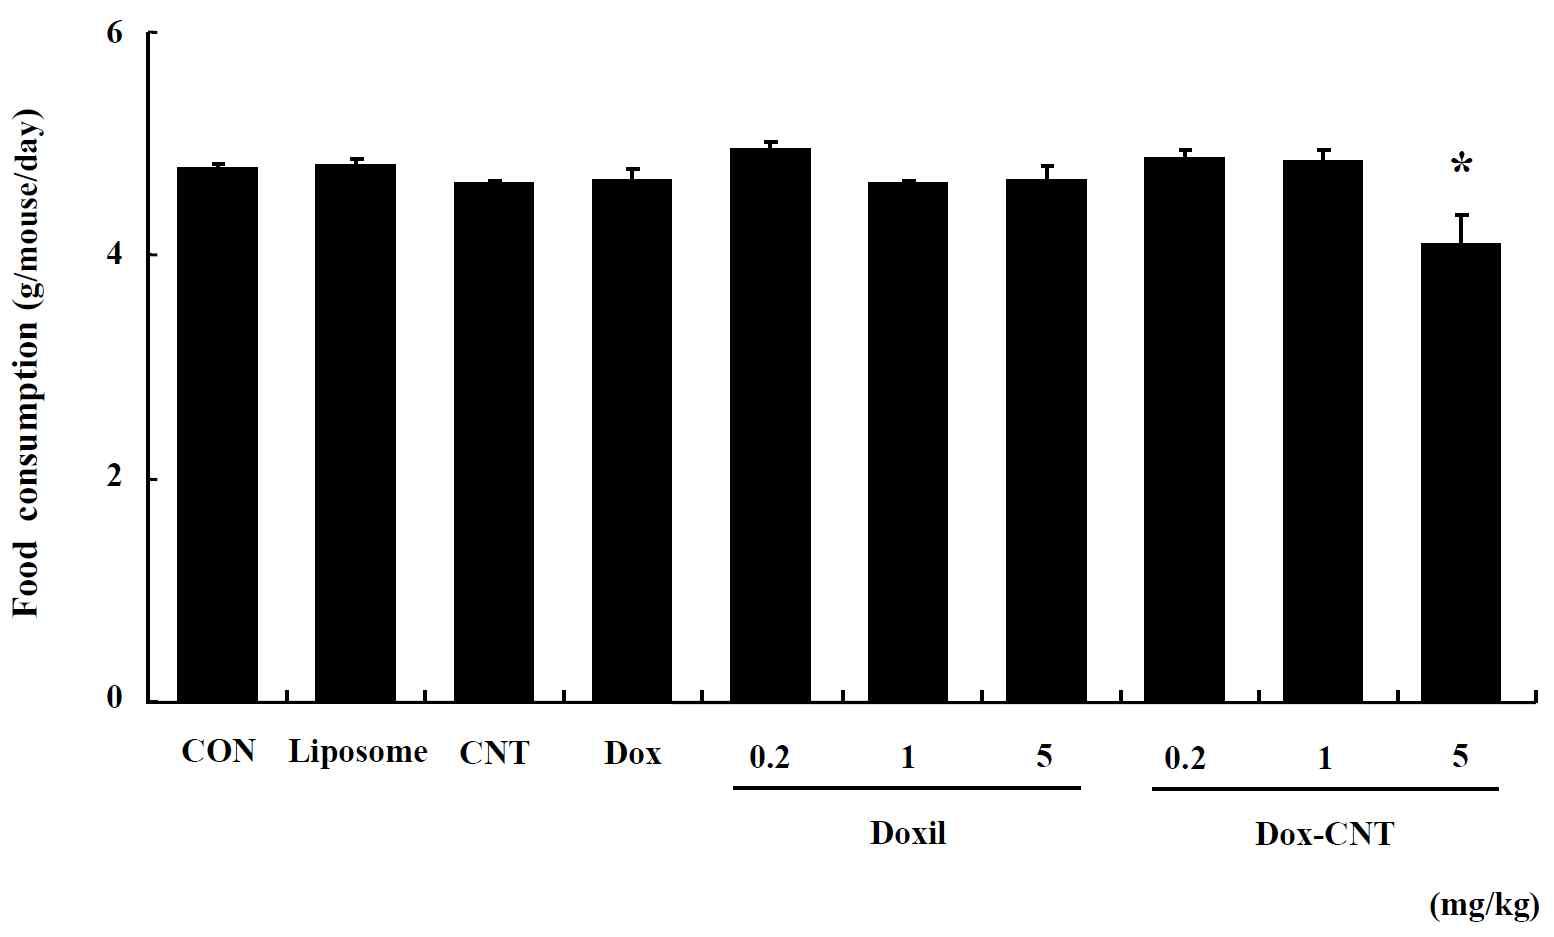 The change of food consumption in male ICR mice for 14 days after single exposure. Mice were respectively administered by intravenous injection with liposome, CNT, Dox, Doxil (0.2, 1, 5 mg/kg) and Dox-CNT (0.2, 1, 5 mg/kg). The results are presented as mean ± SE (n = 10). * p < 0.05, significantly different from the control.